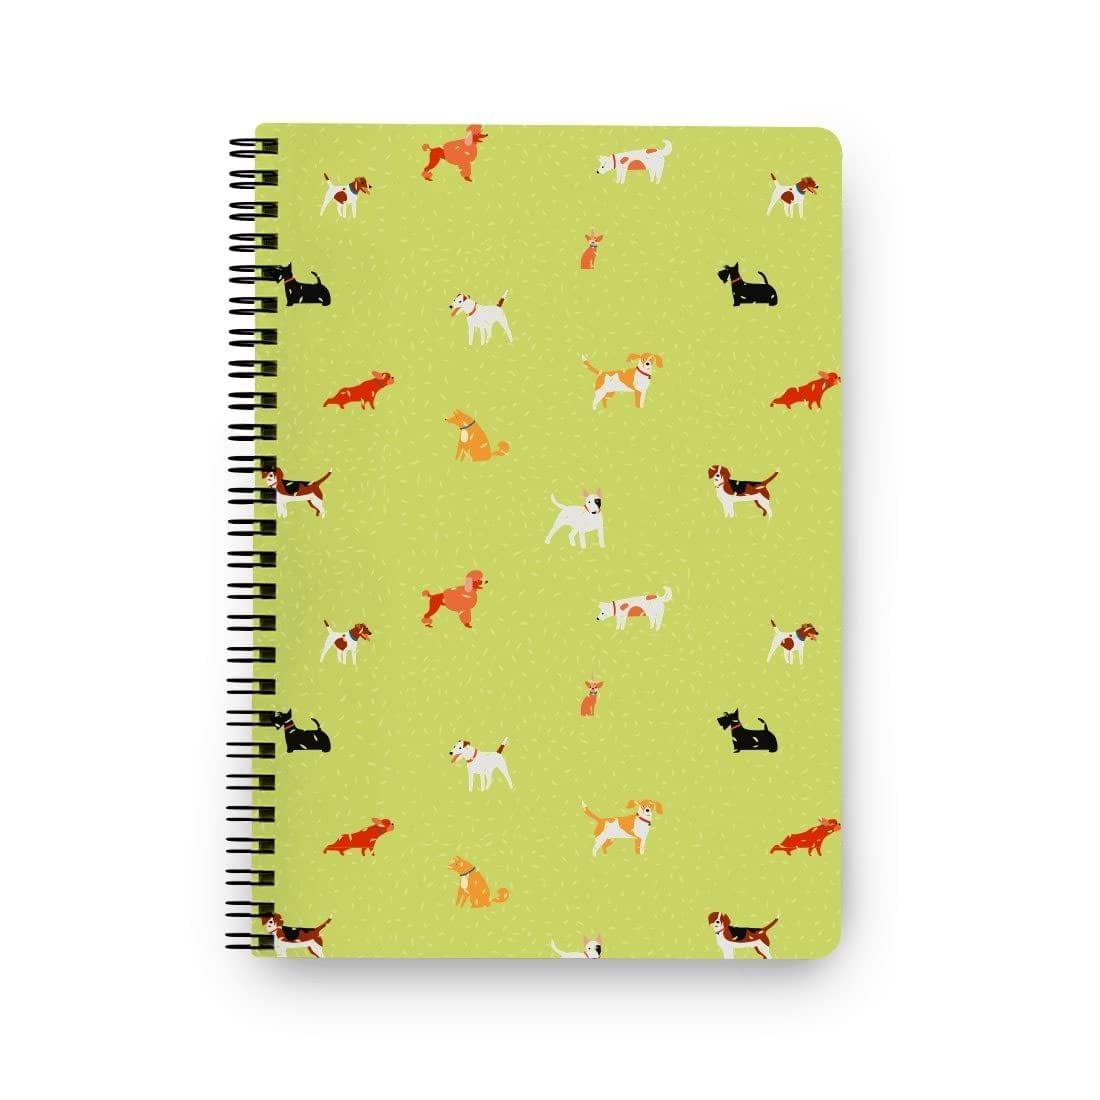 The Art People Dog Lover Wiro Notebook - Ruled